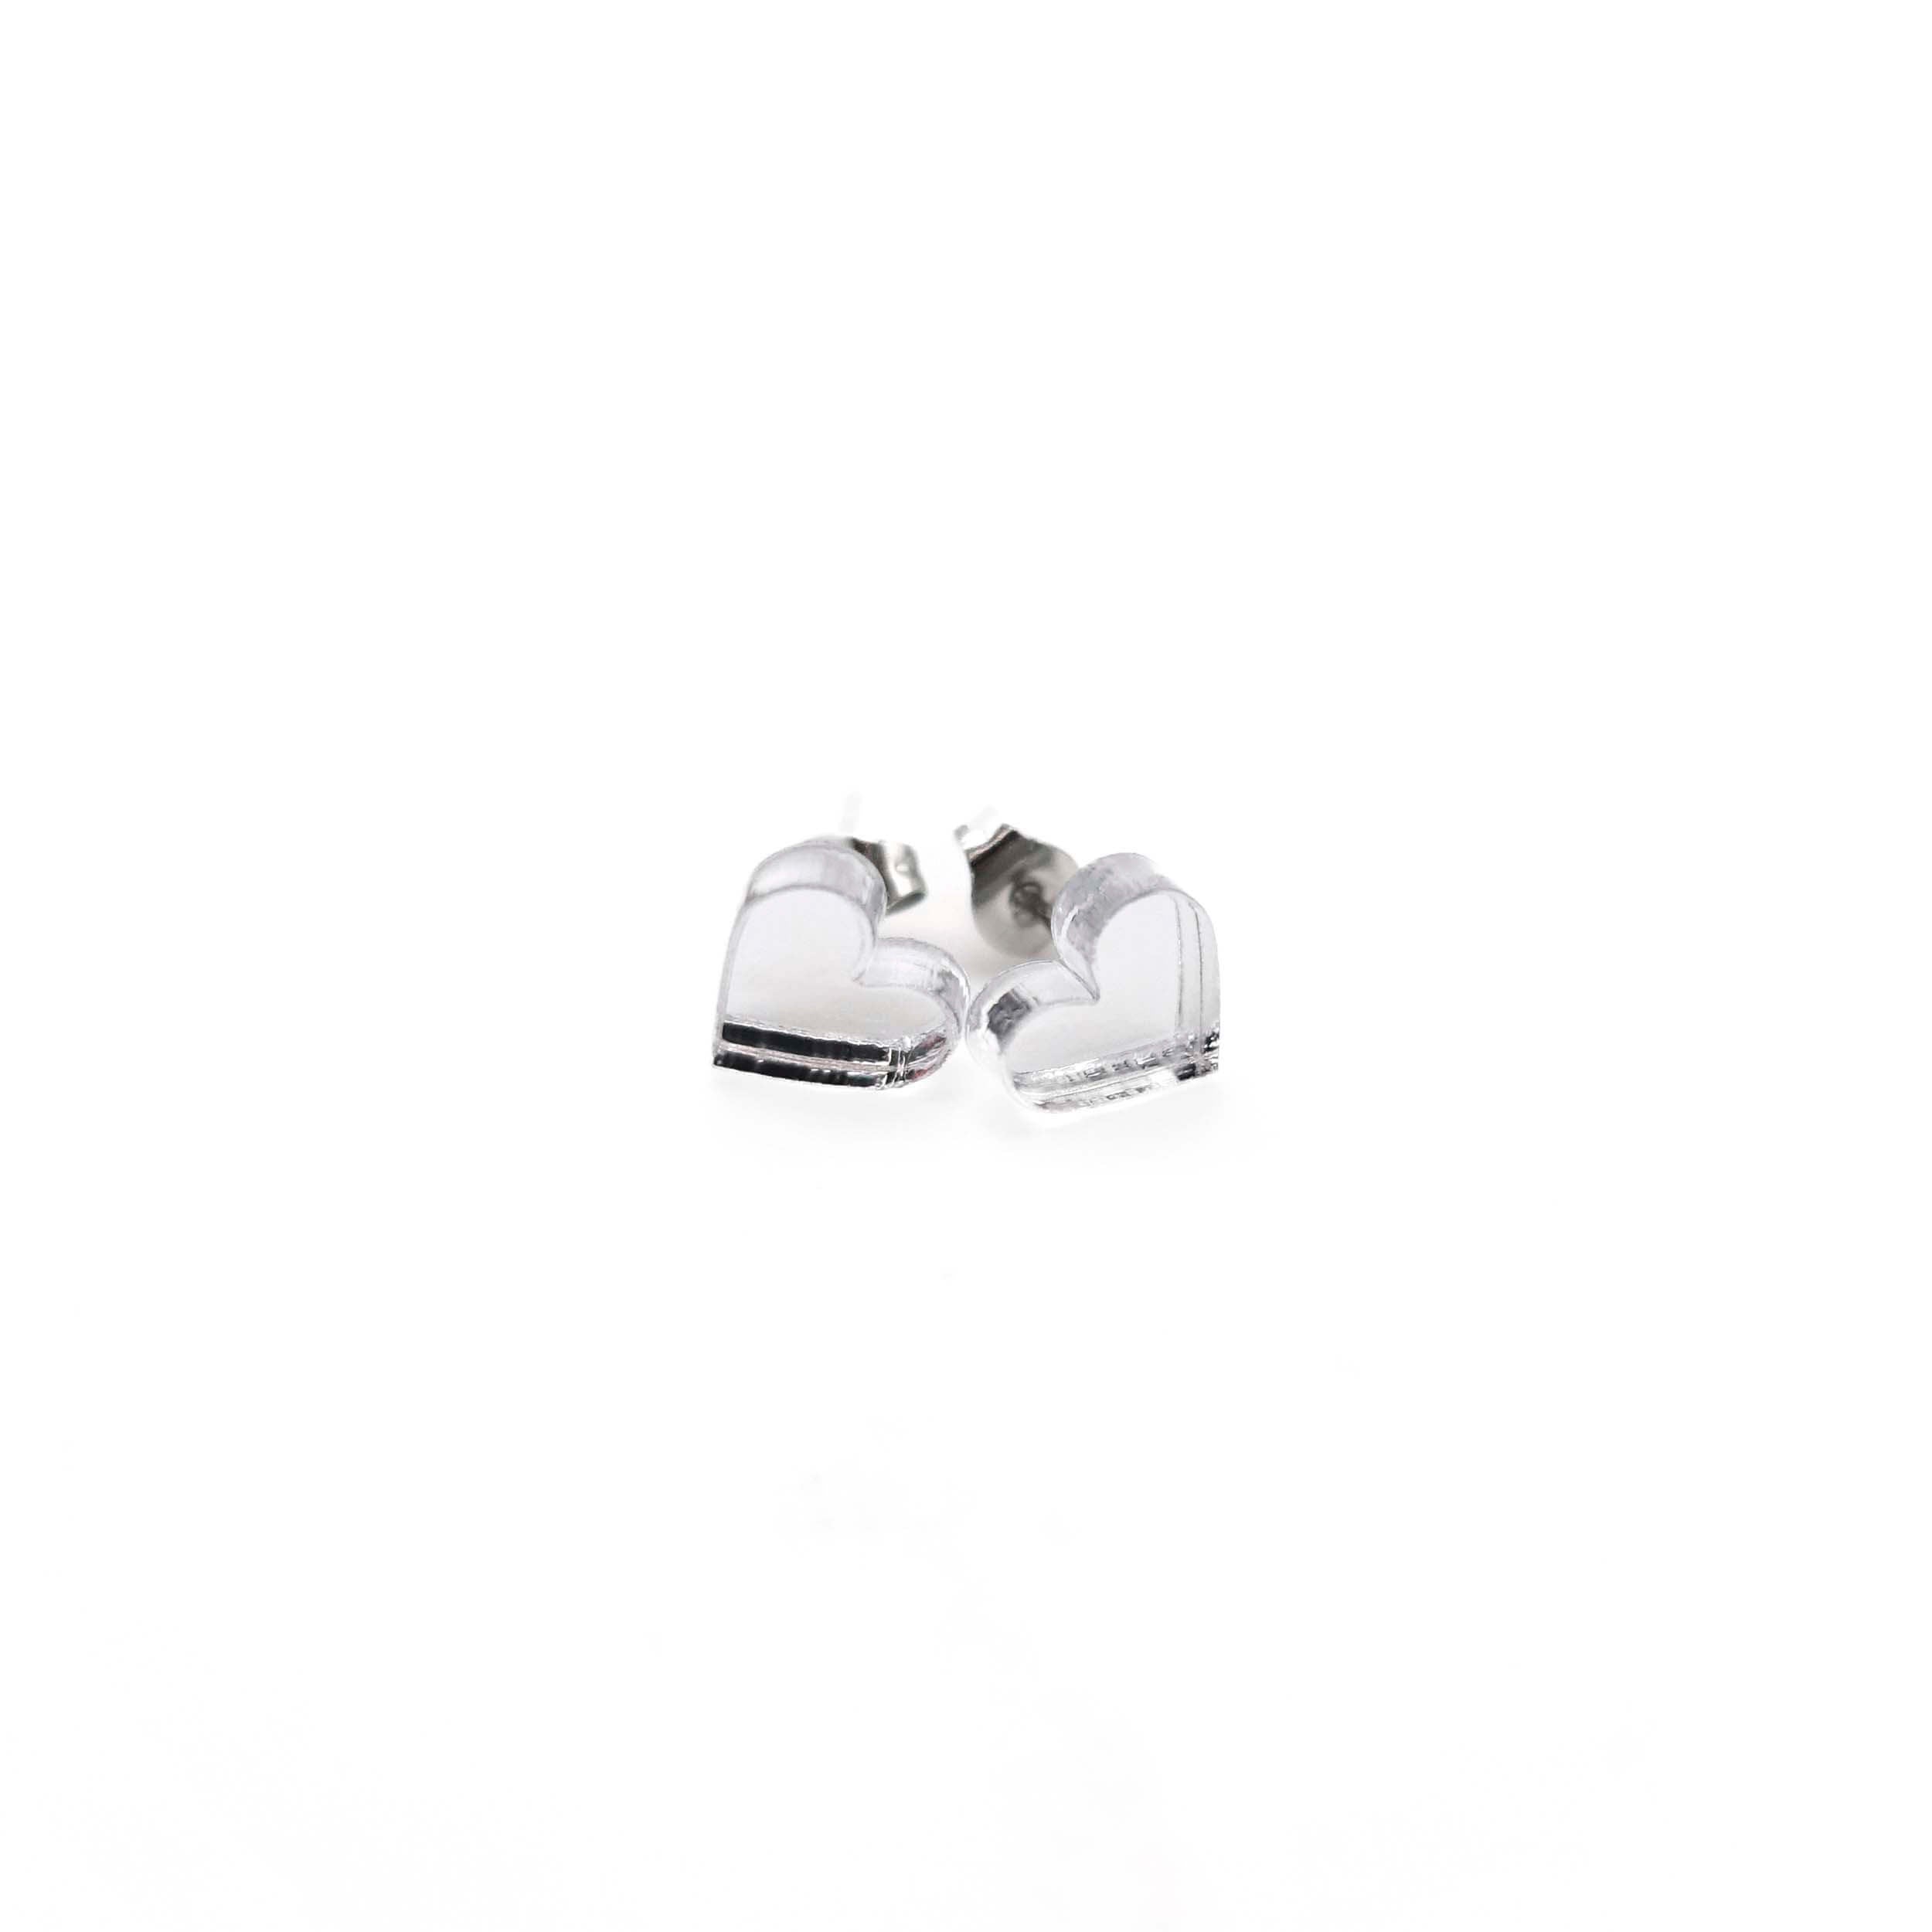 Silver mirror tiny heart stud earrings shown on a white background. 